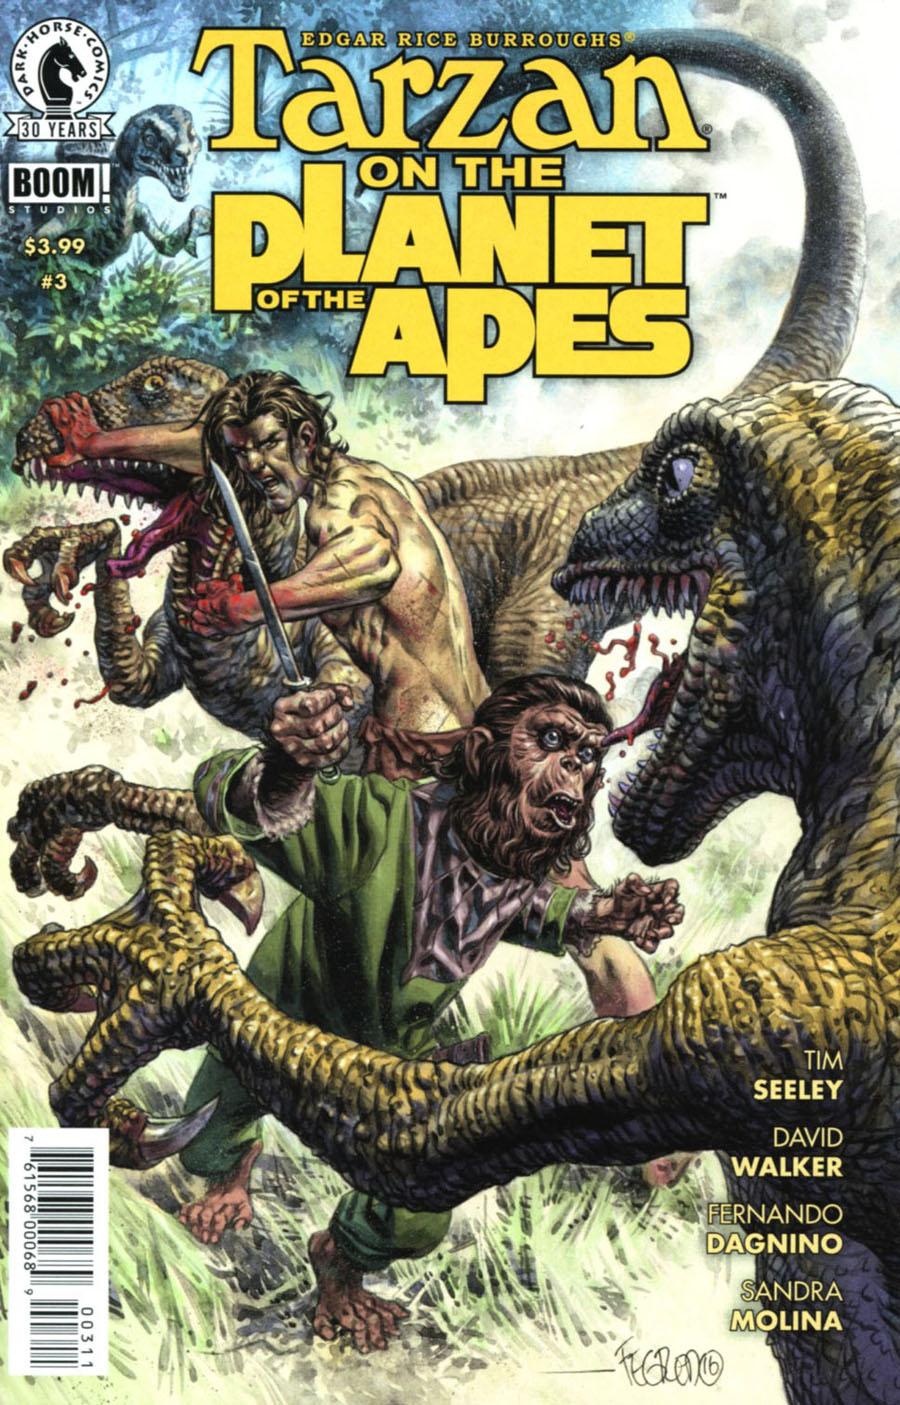 Tarzan On The Planet Of The Apes Vol. 1 #3